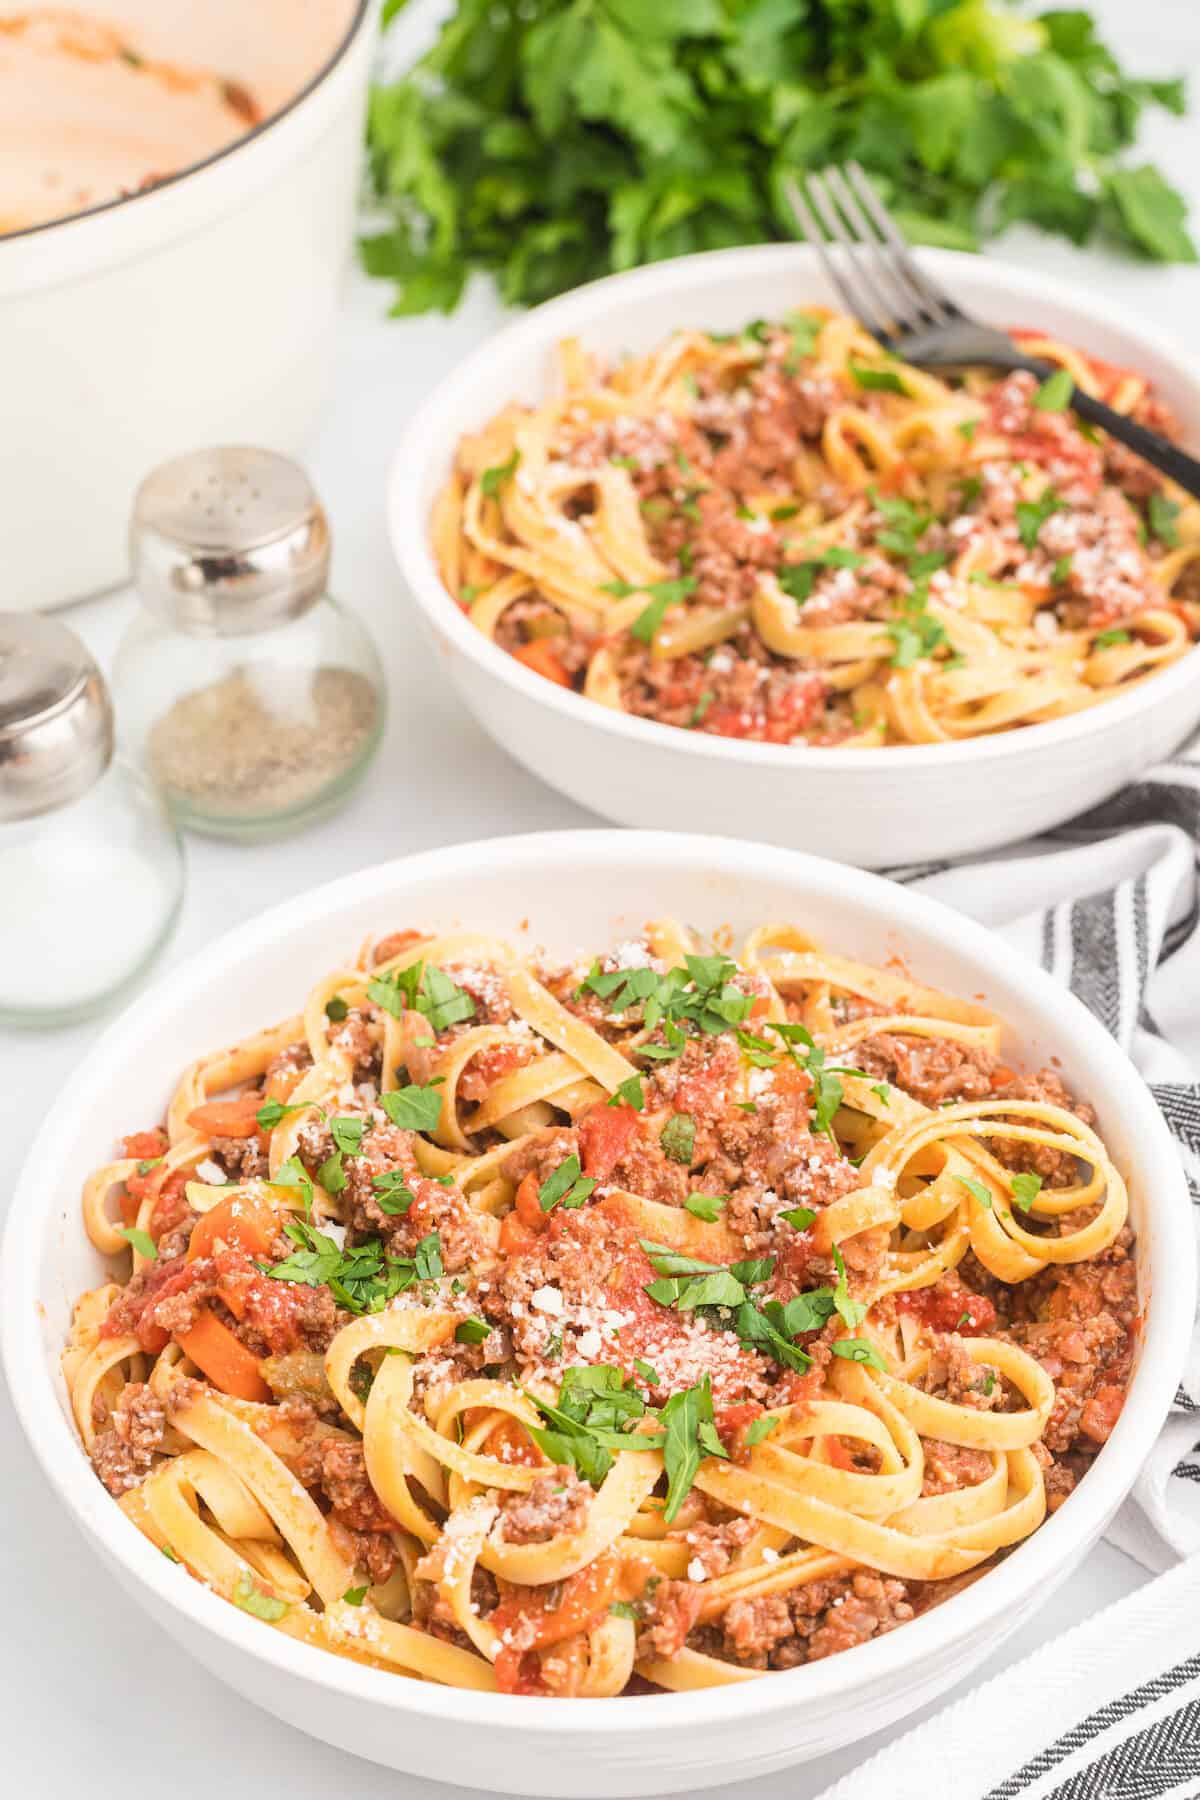 two large bowls of pasta with bolognese sauce.